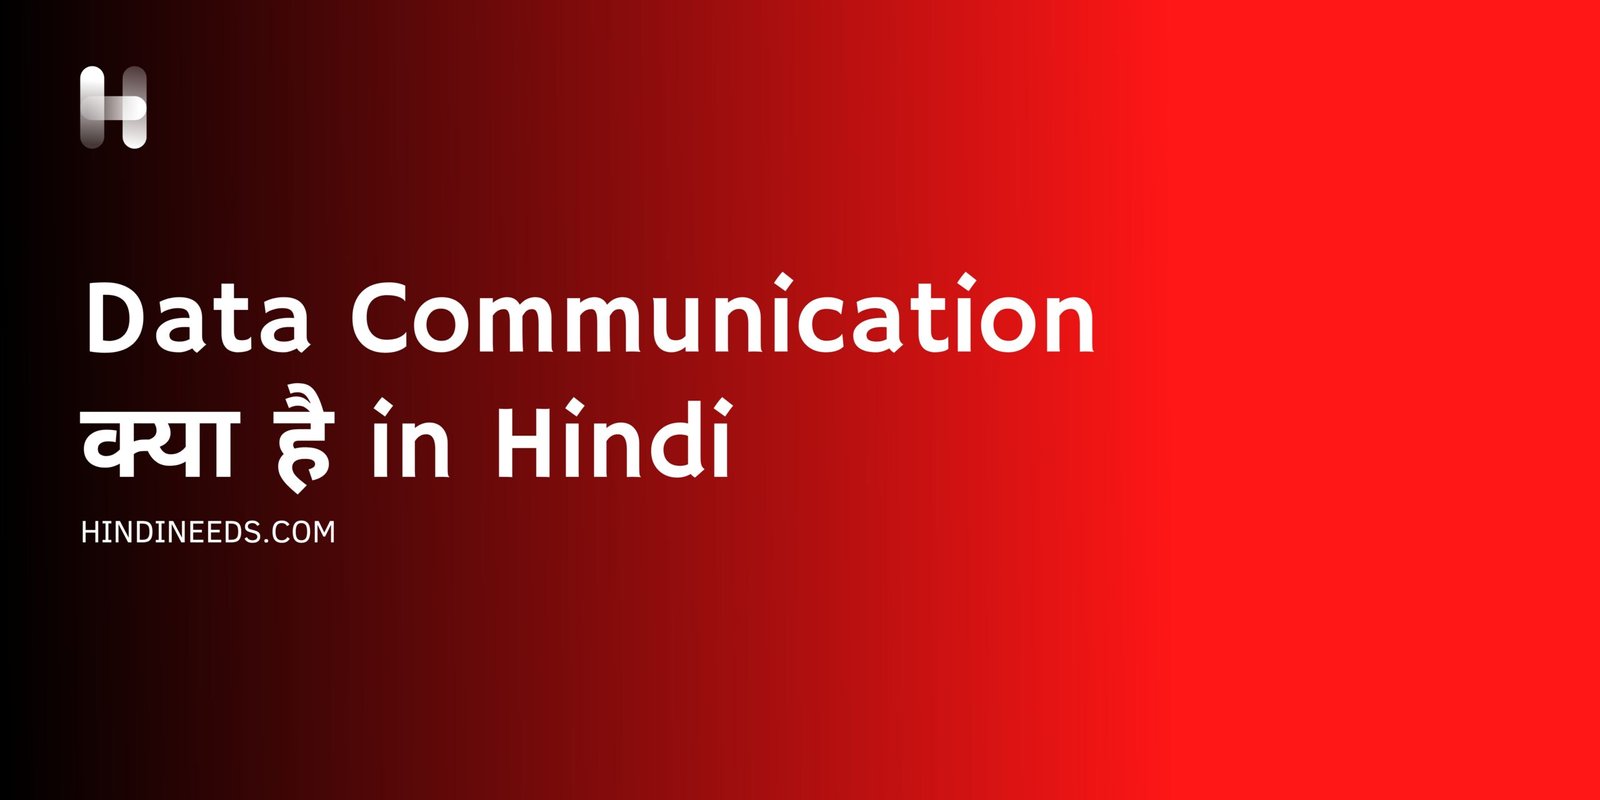 What is Data Communication In Hindi HINDINEEDS